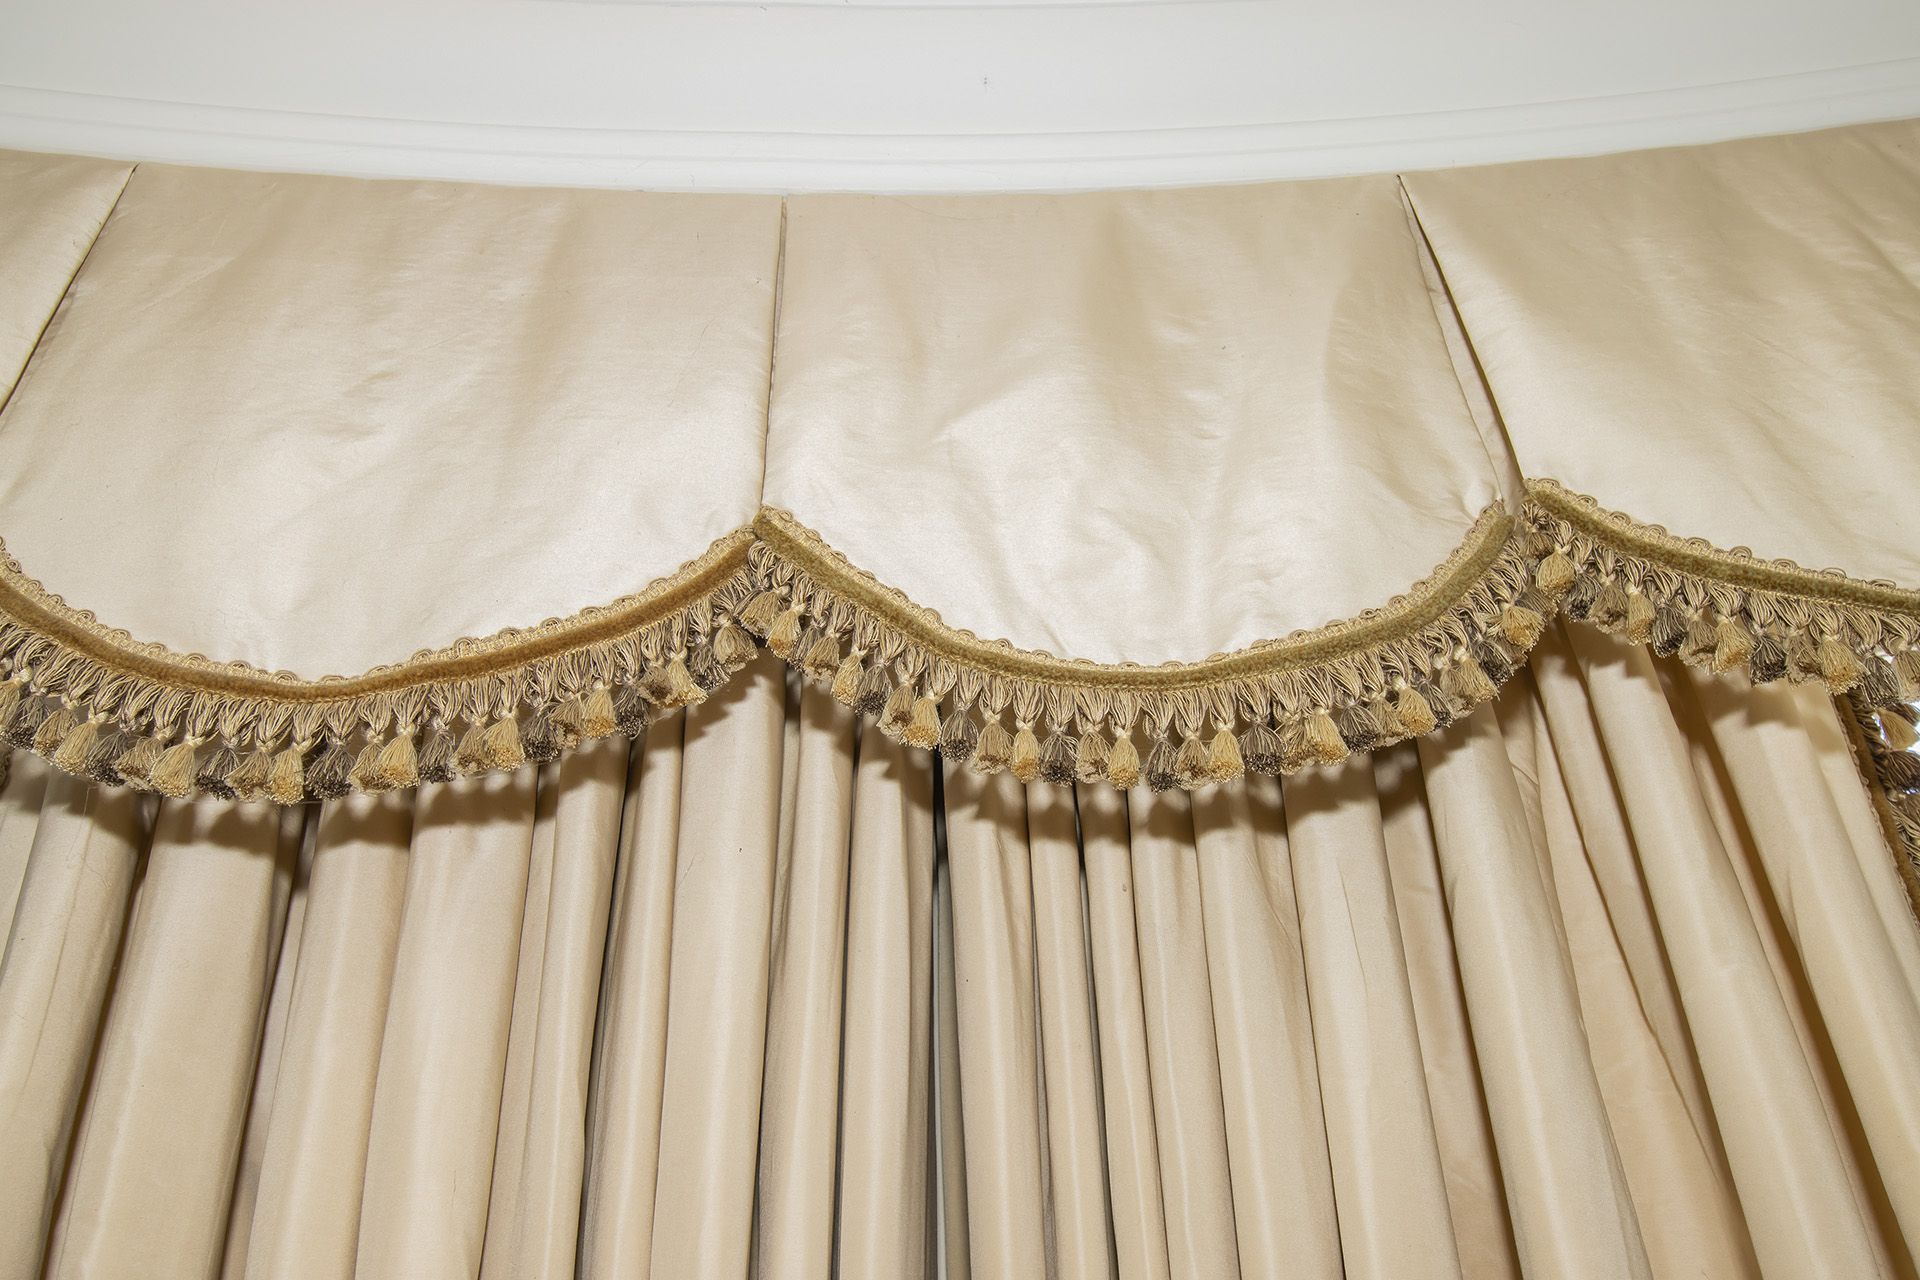 Silk cream drapes with pelmet and swags spans an area of 5m french door and windows - Image 8 of 9